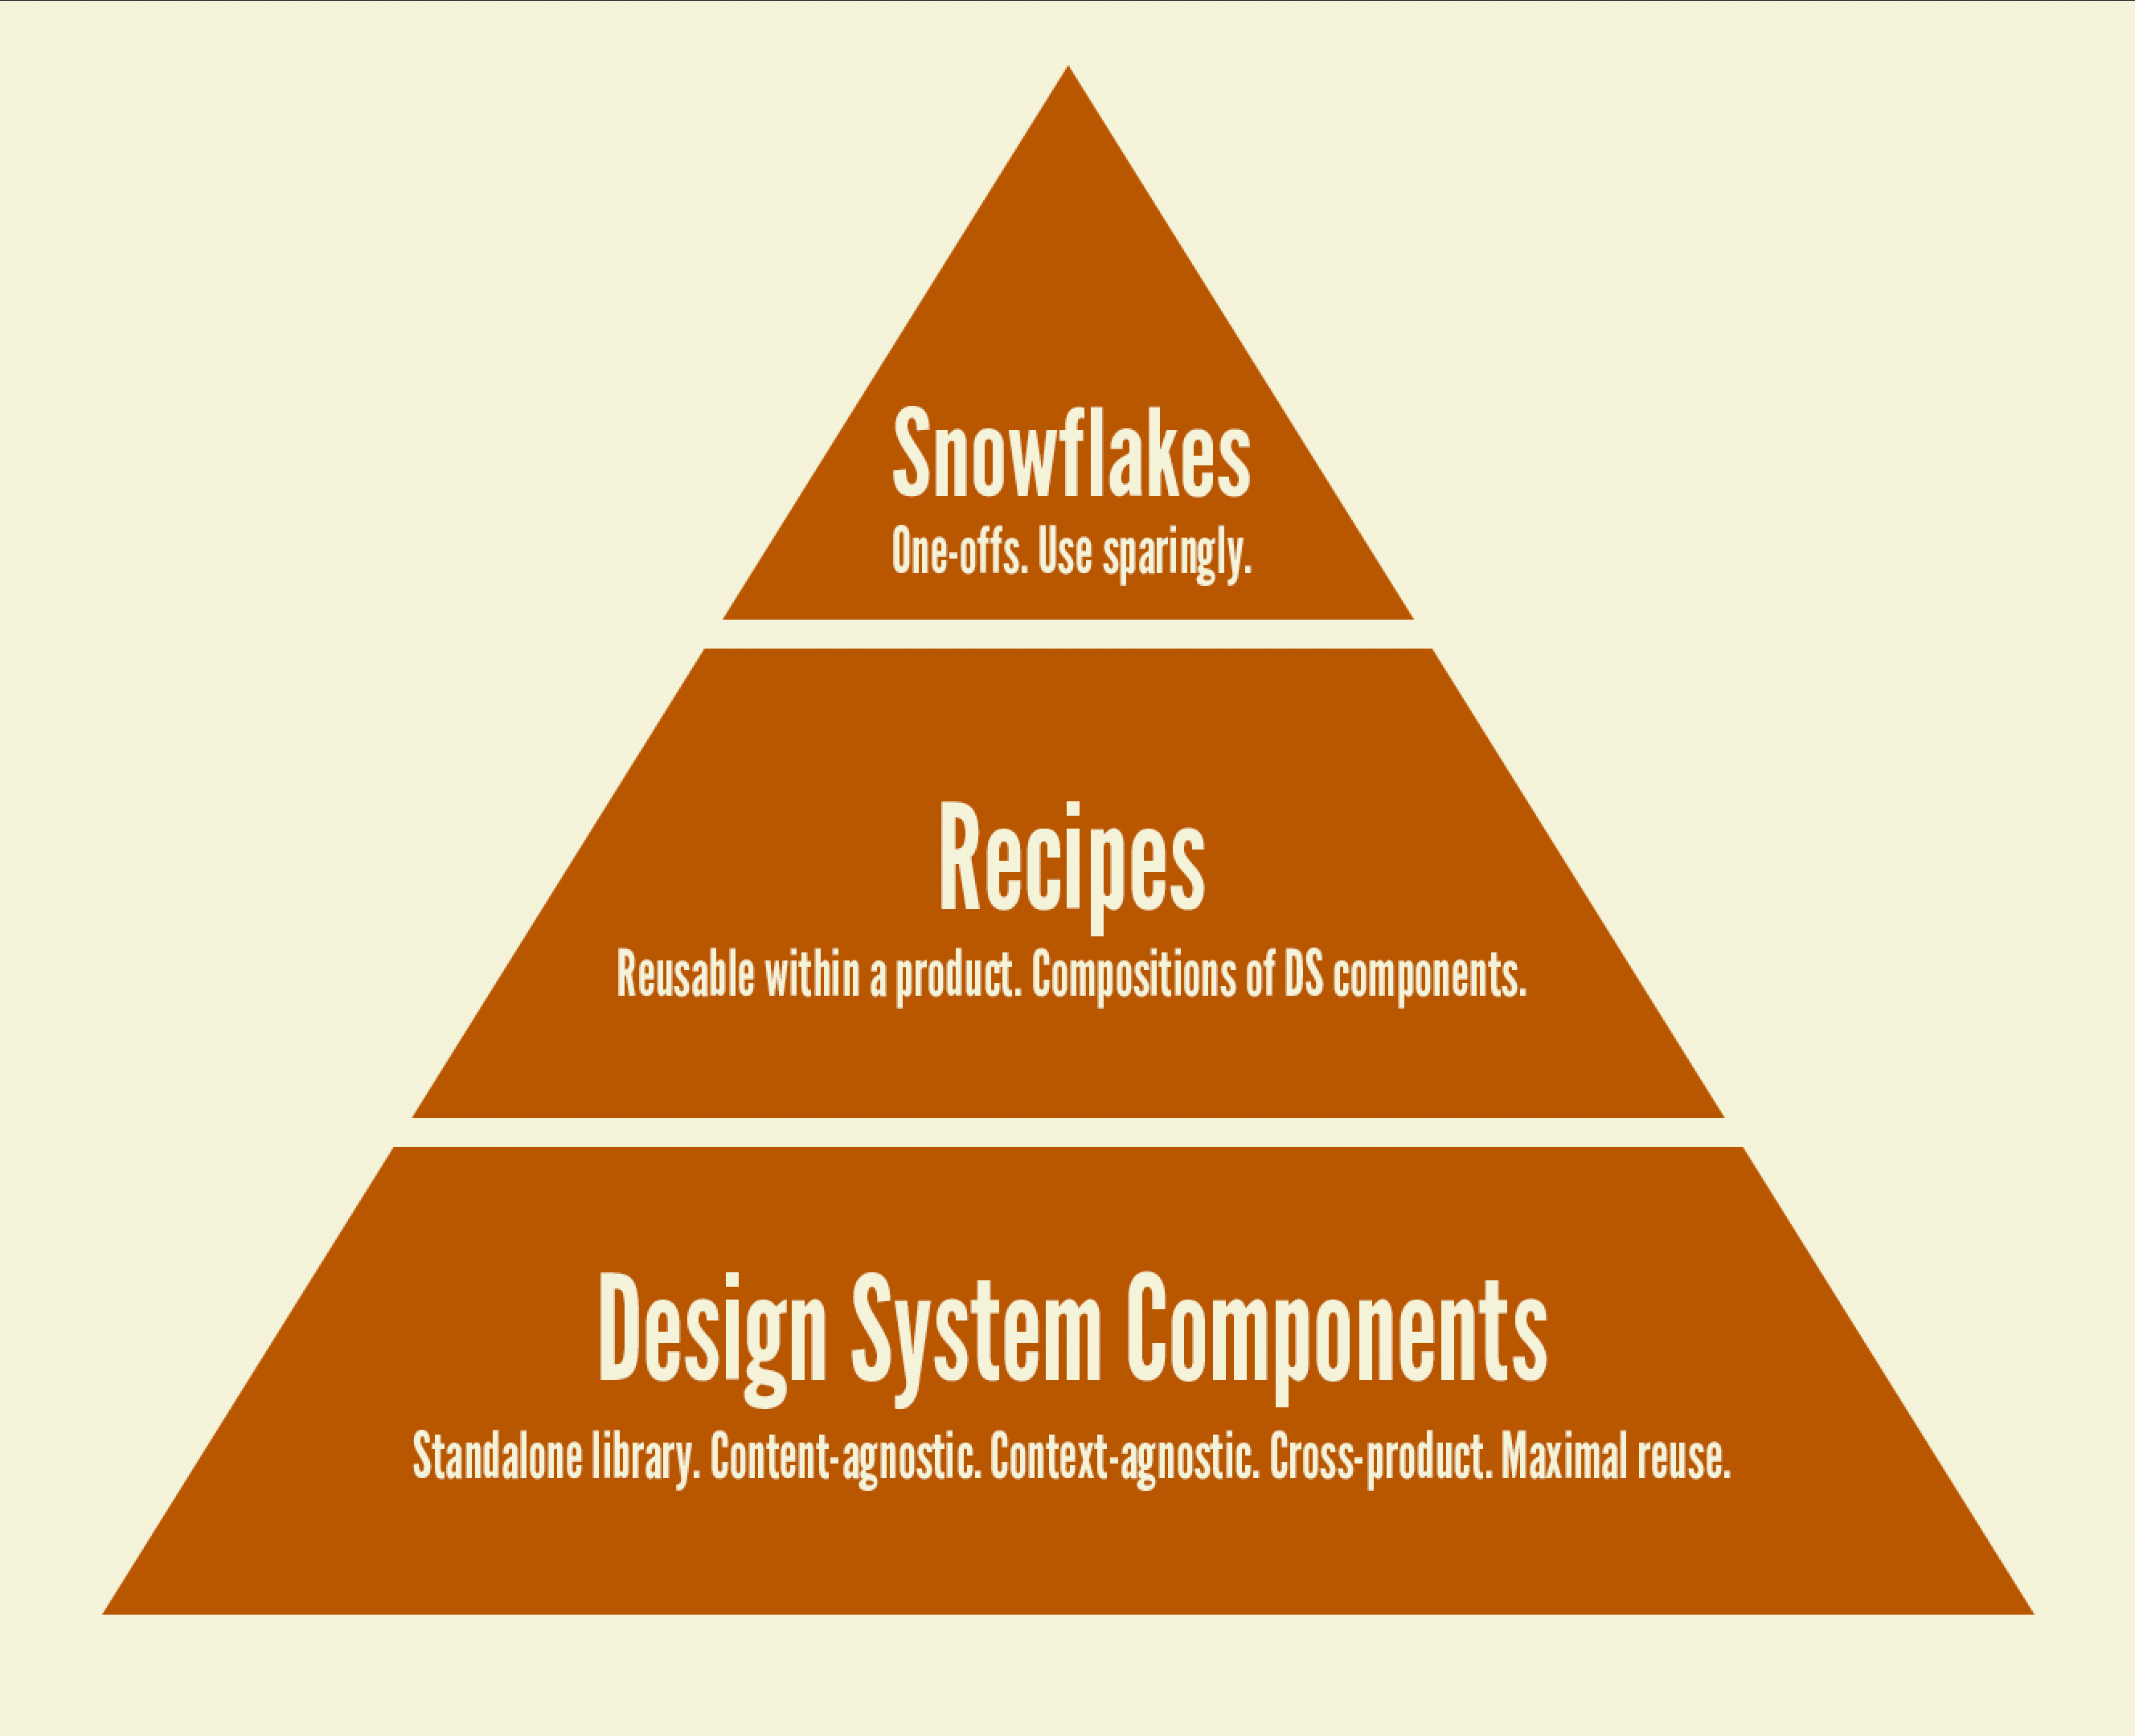 Product components. Design System components.